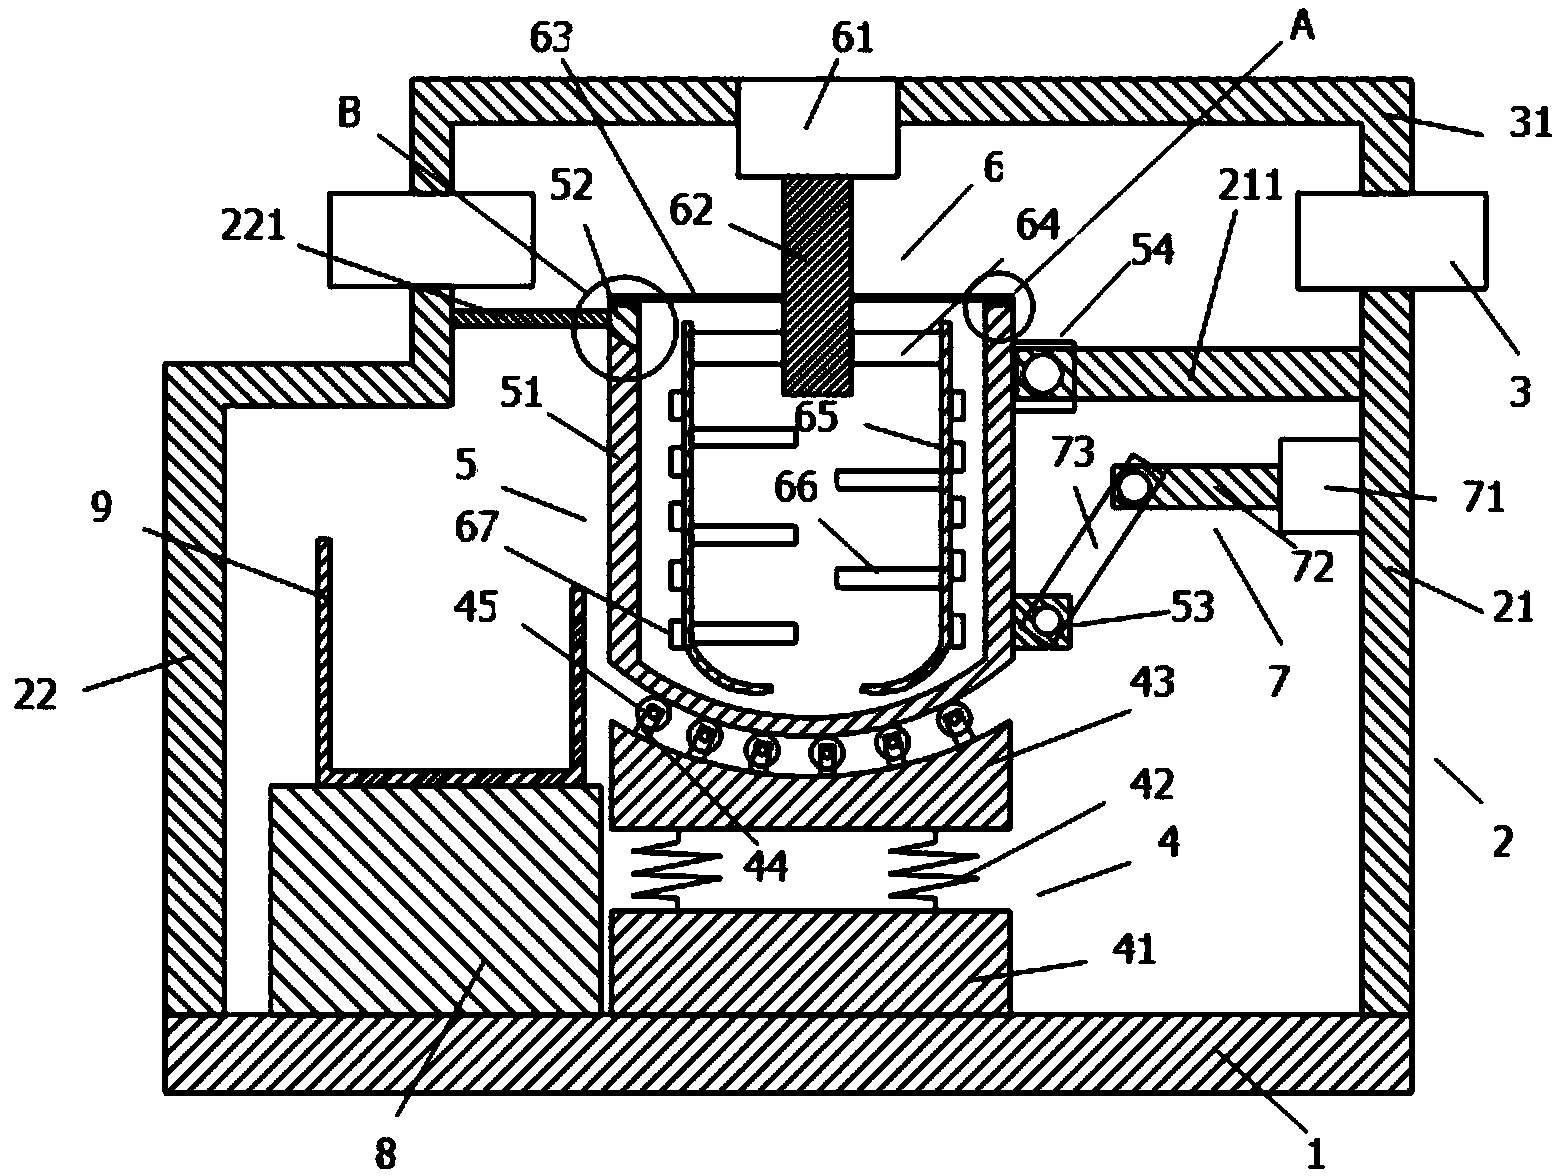 Mixing and pouring device applicable to medical and chemical materials